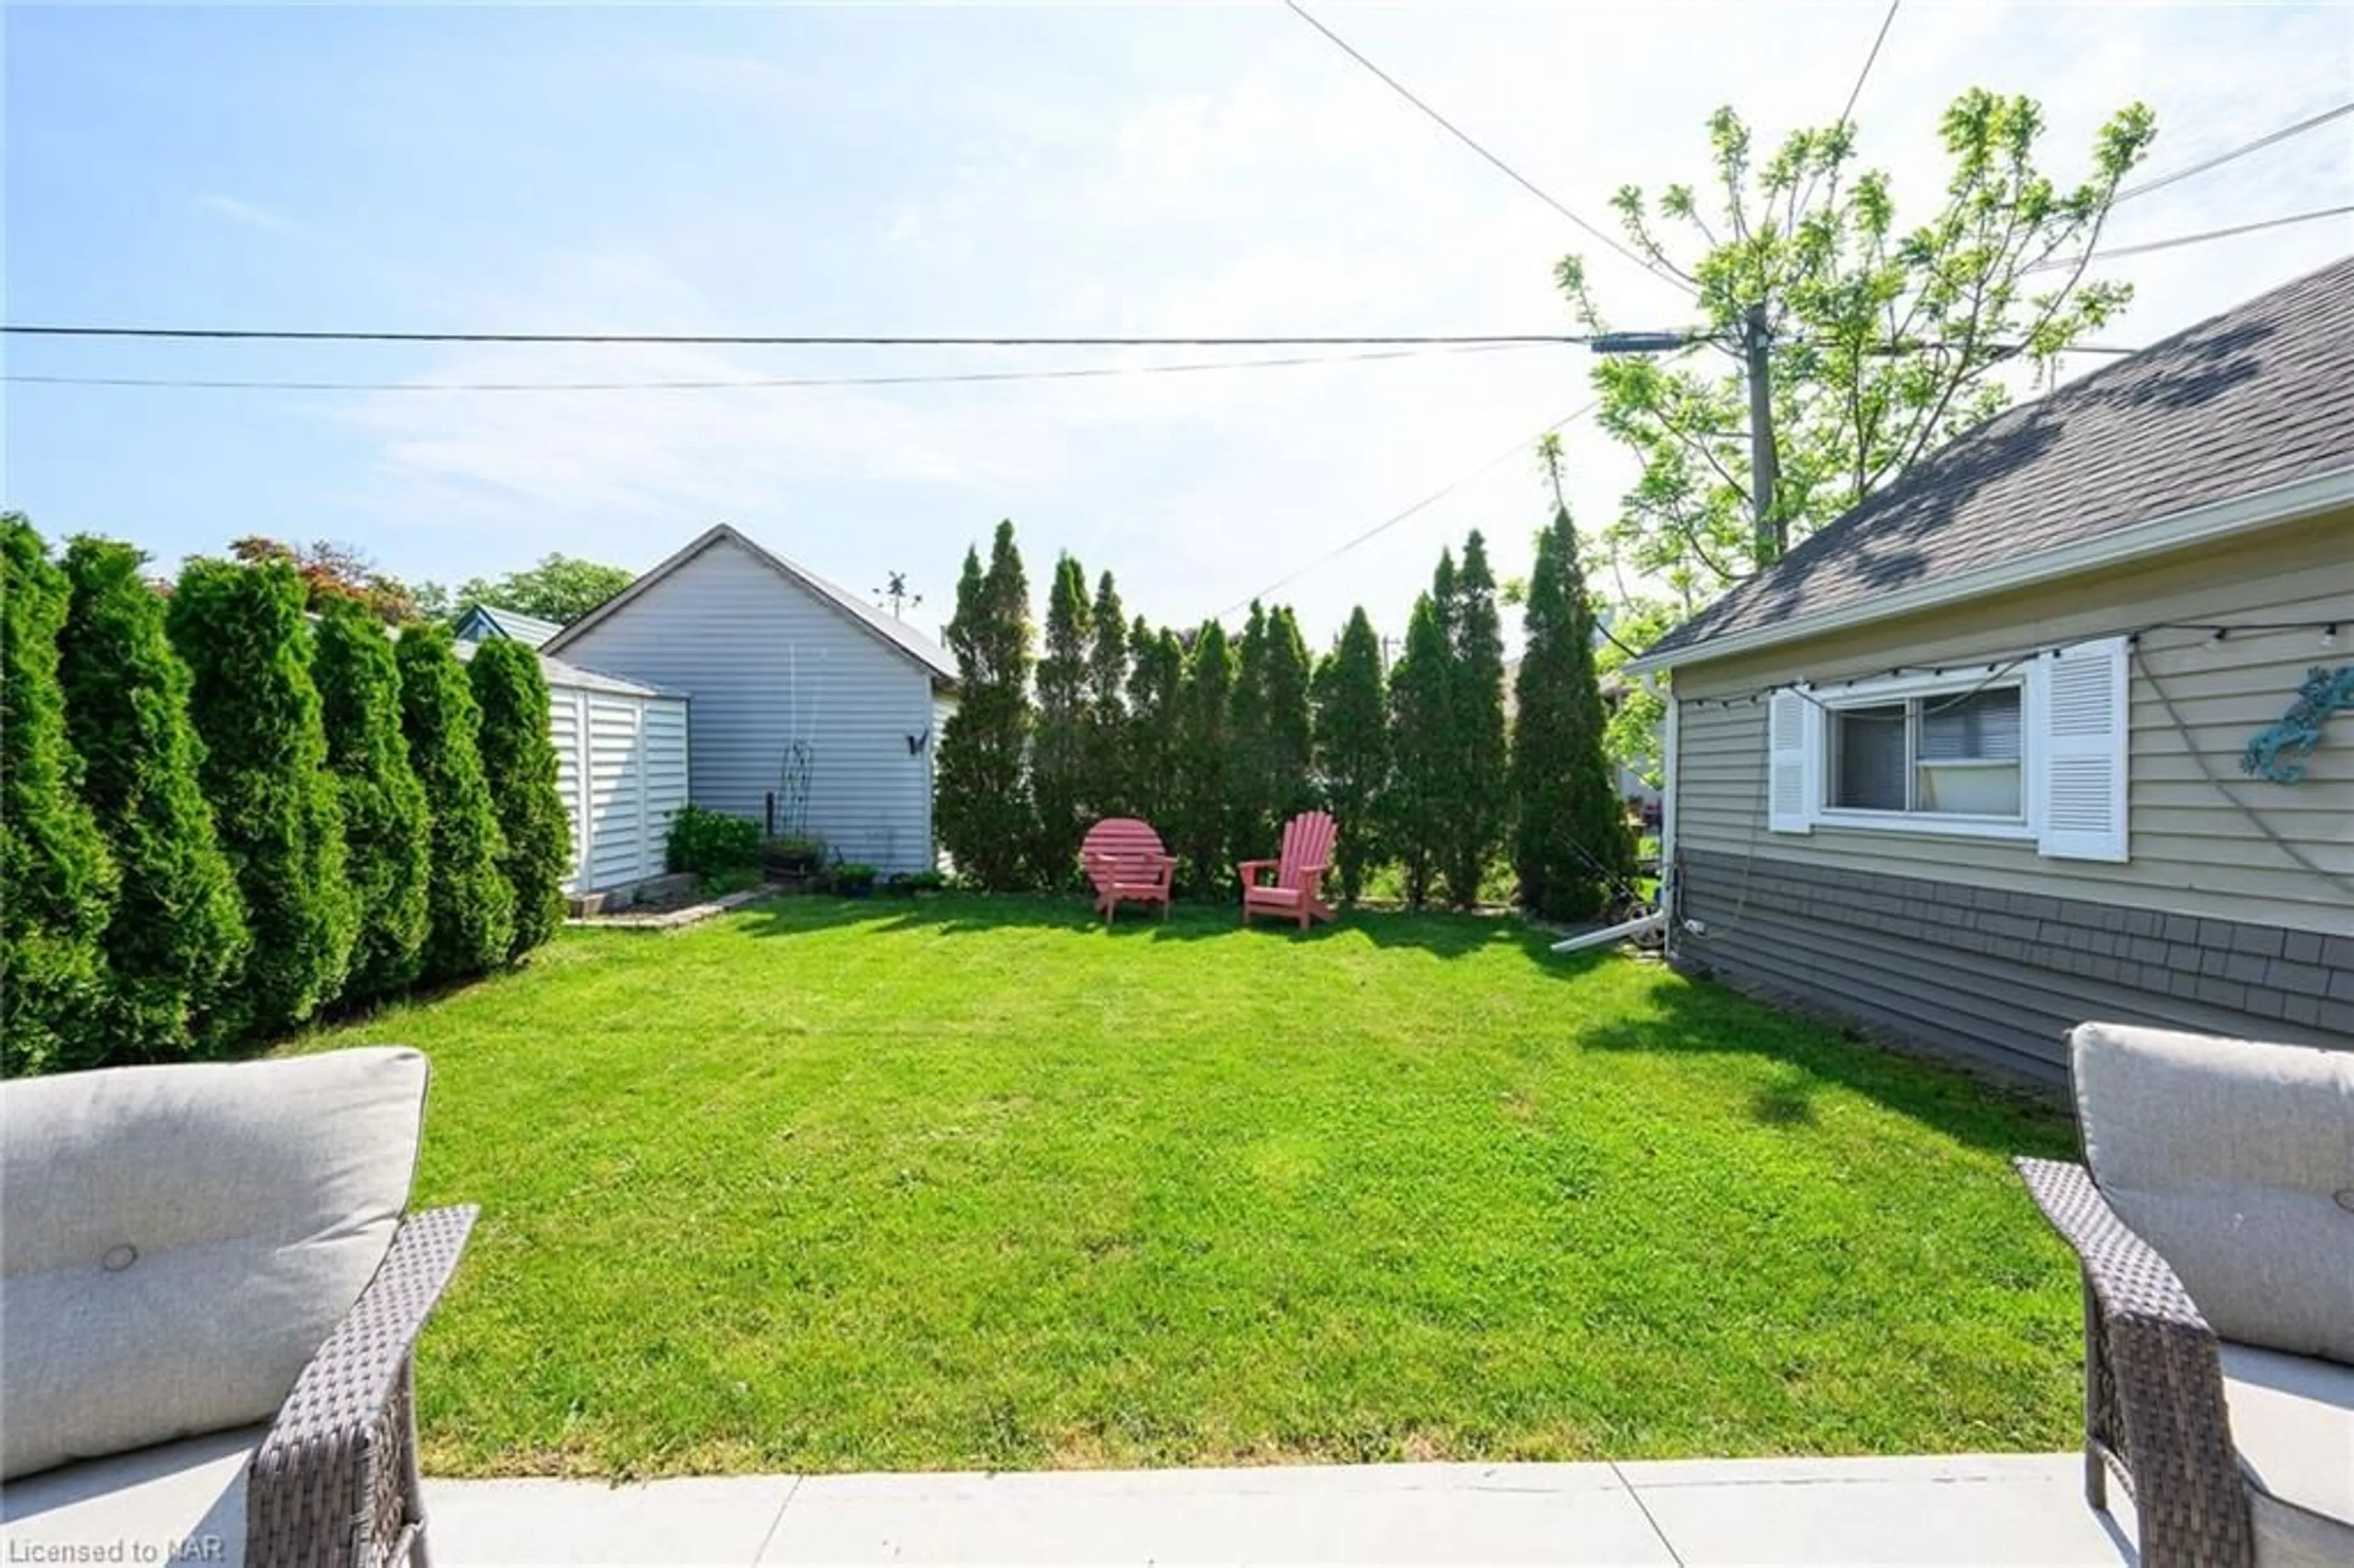 Fenced yard for 46 Knoll St, Port Colborne Ontario L3K 5A5